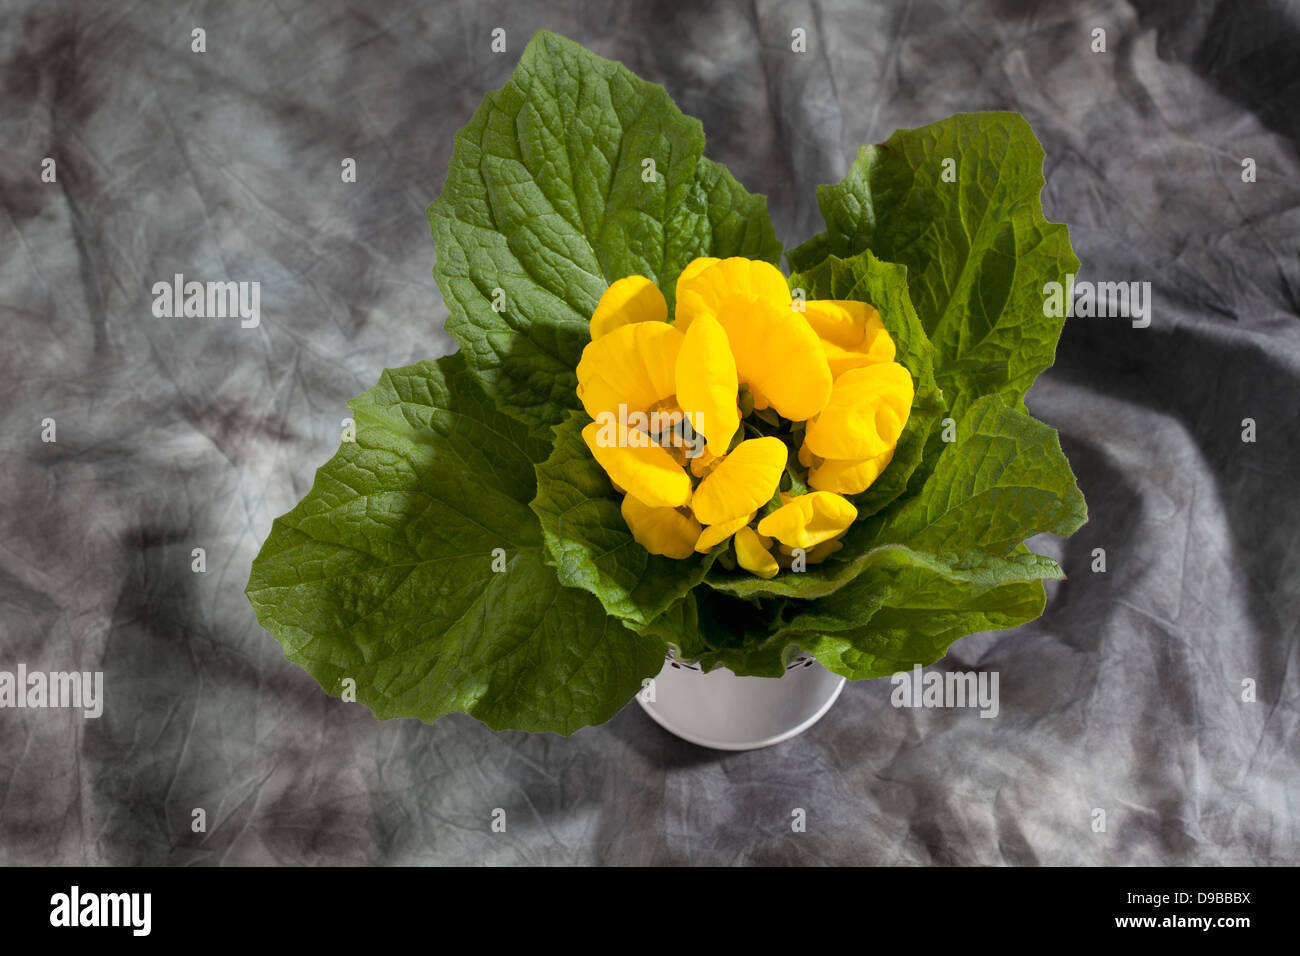 Yellow slipper flowers on grey background, close up Stock Photo